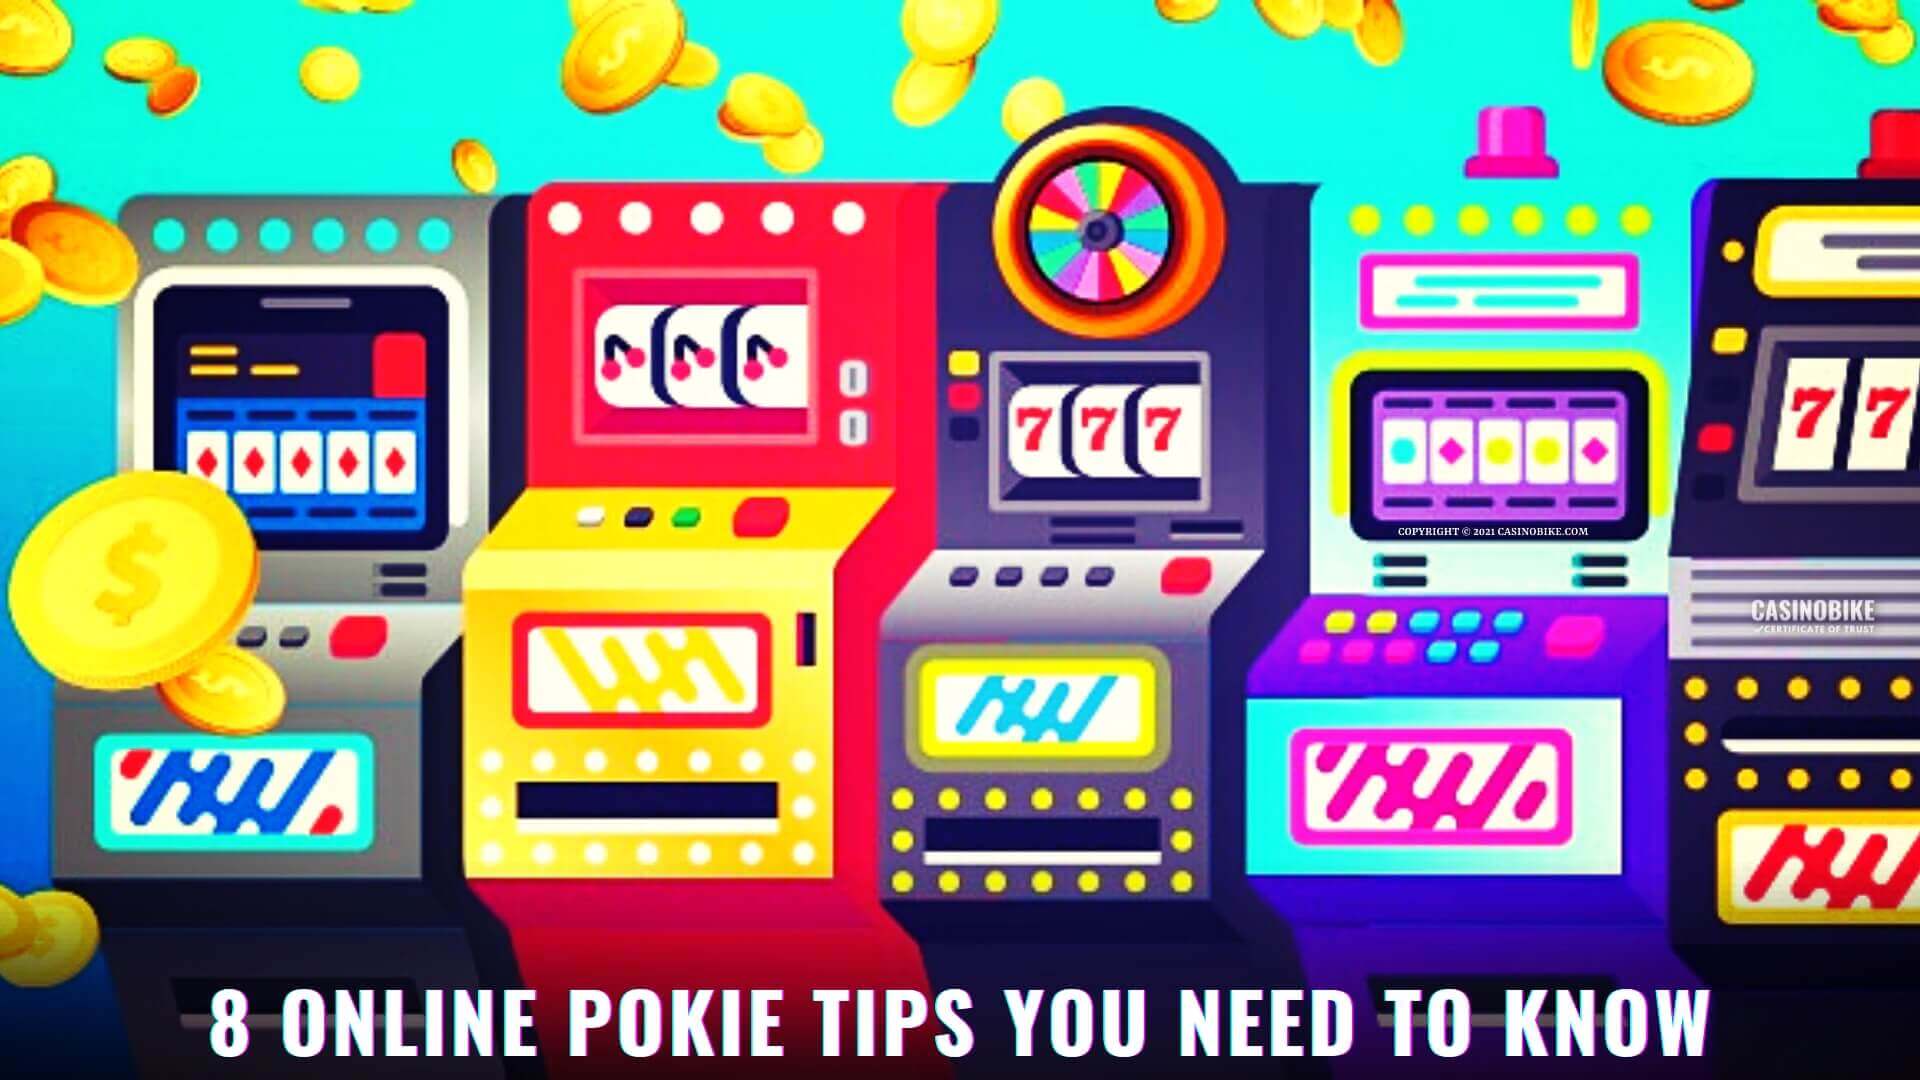 8 online pokie tips you need to know